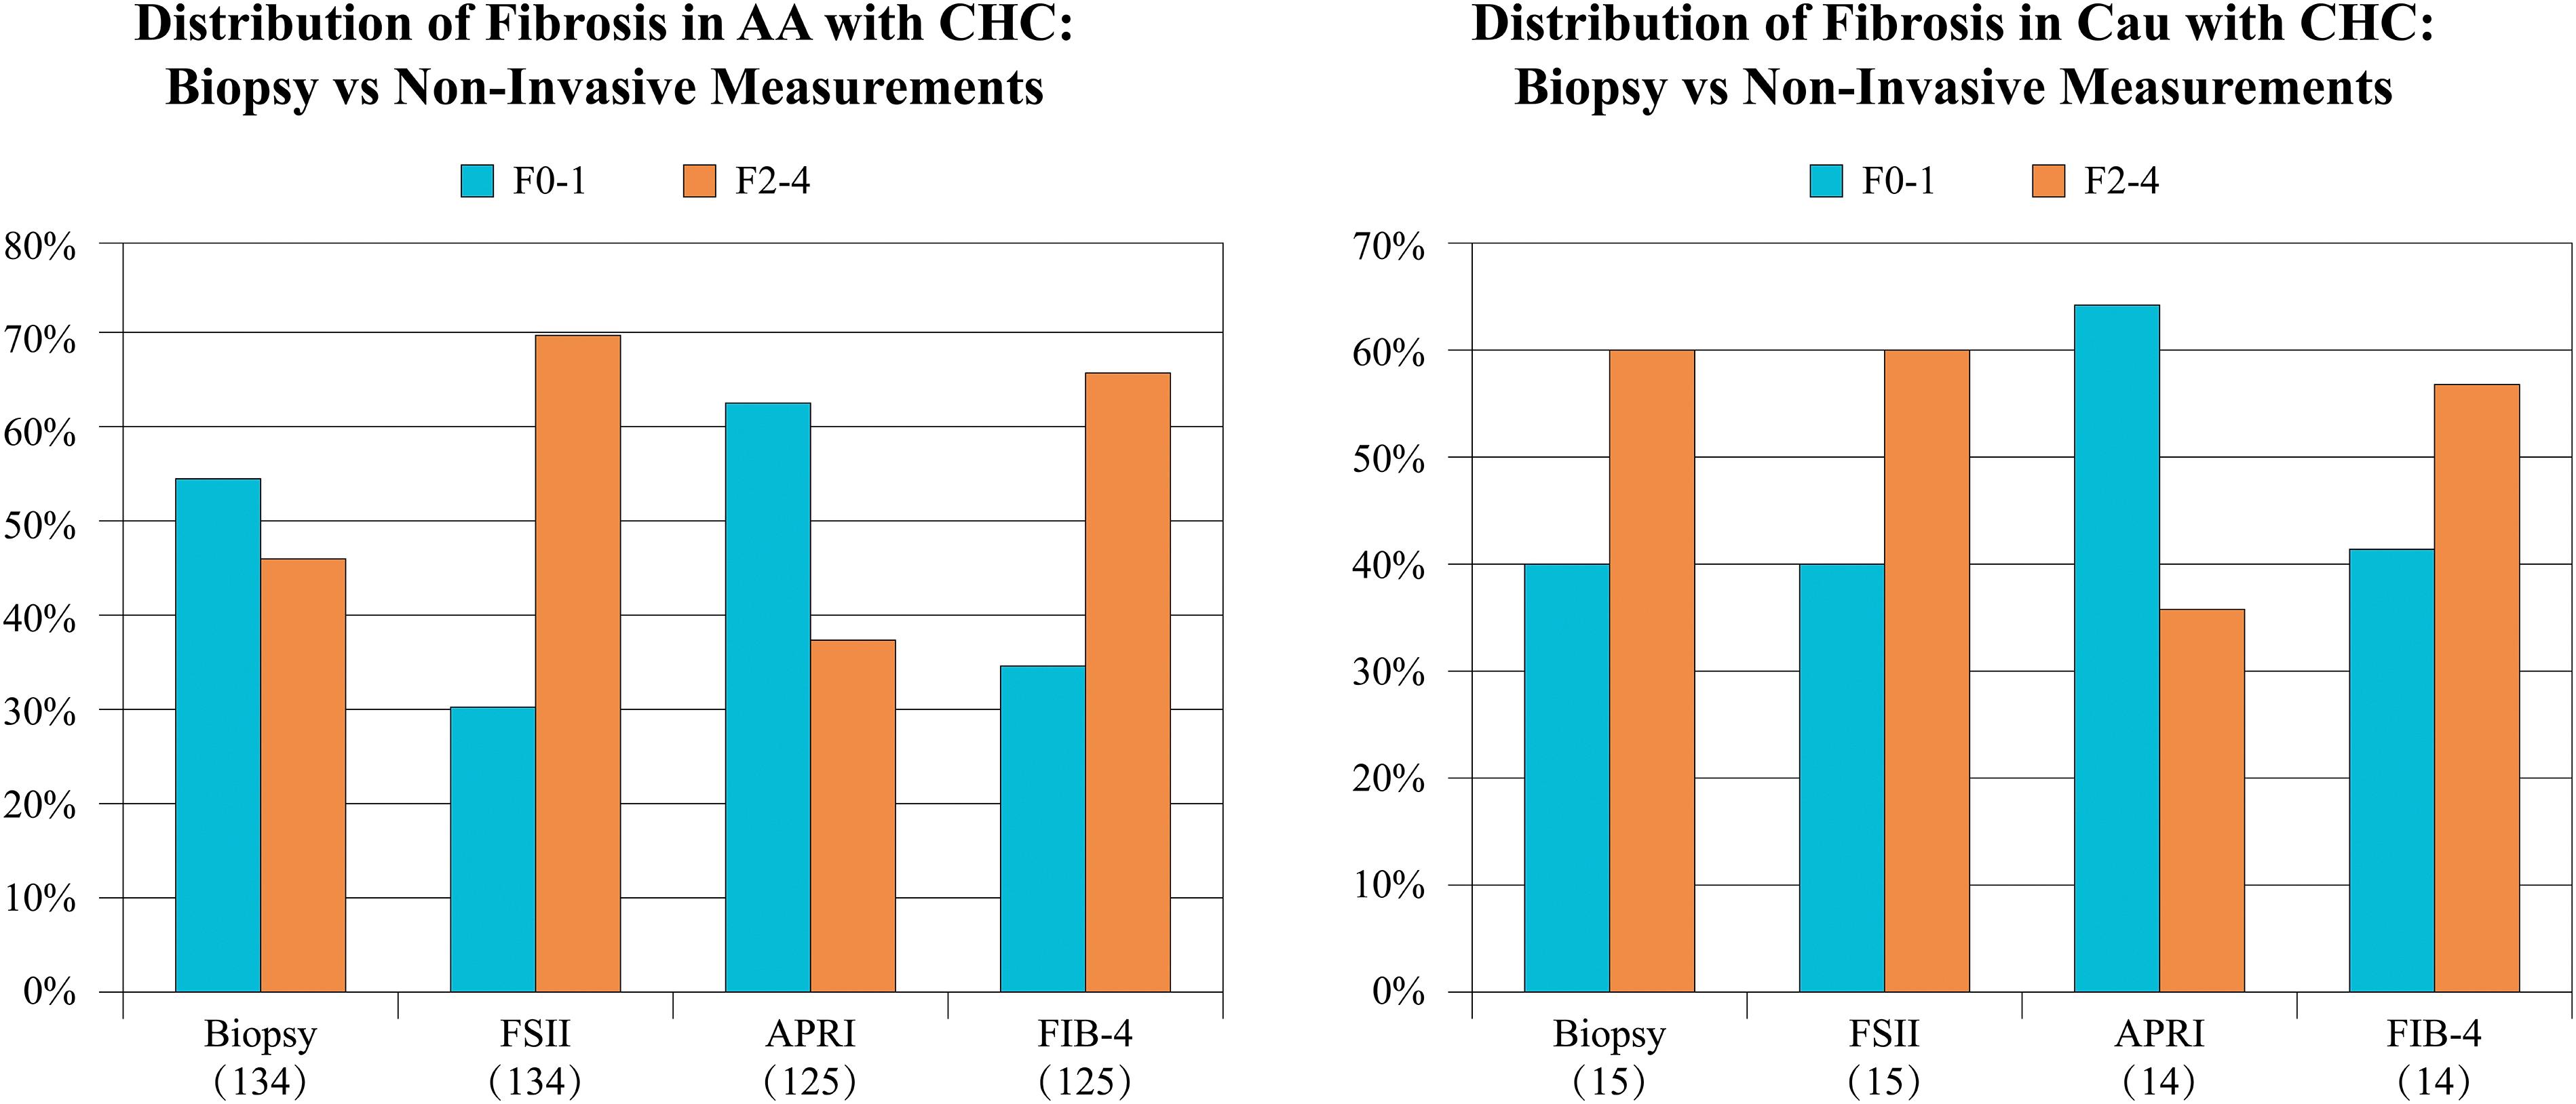 Distribution of fibrosis in patients with chronic hepatitis C (CHC).